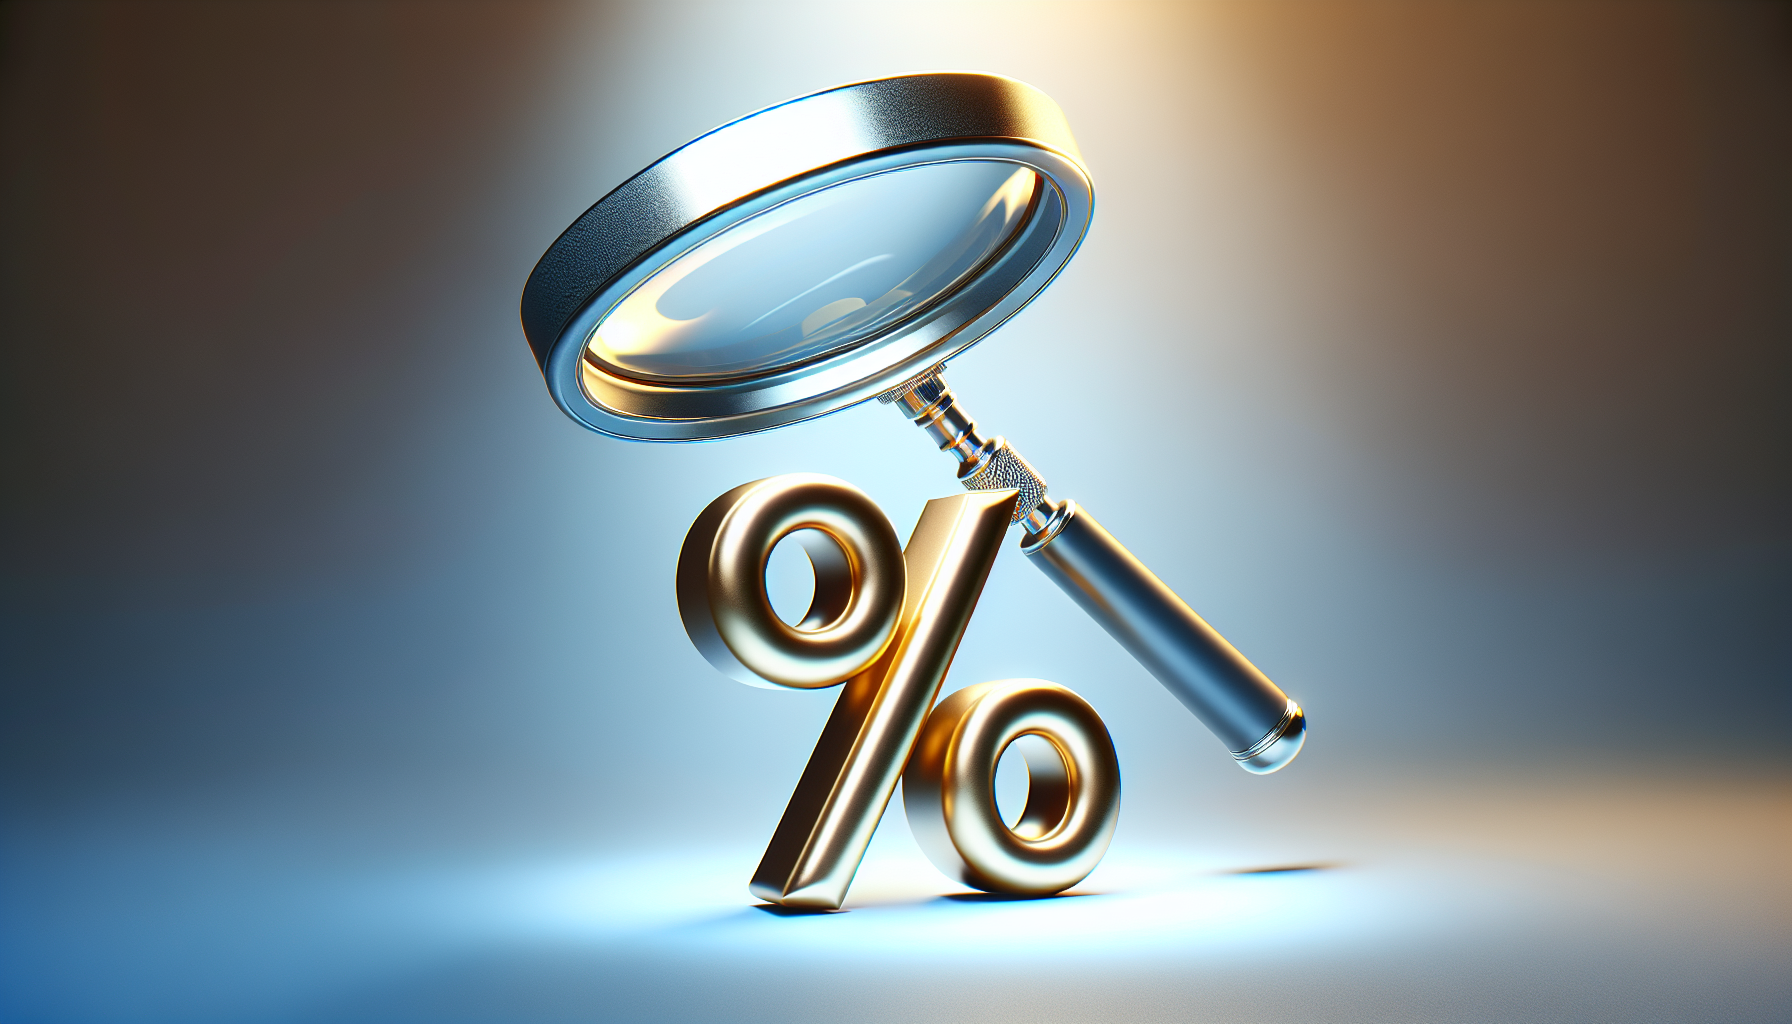 Illustration of a magnifying glass analyzing a percentage symbol, representing decoding the comparison rate